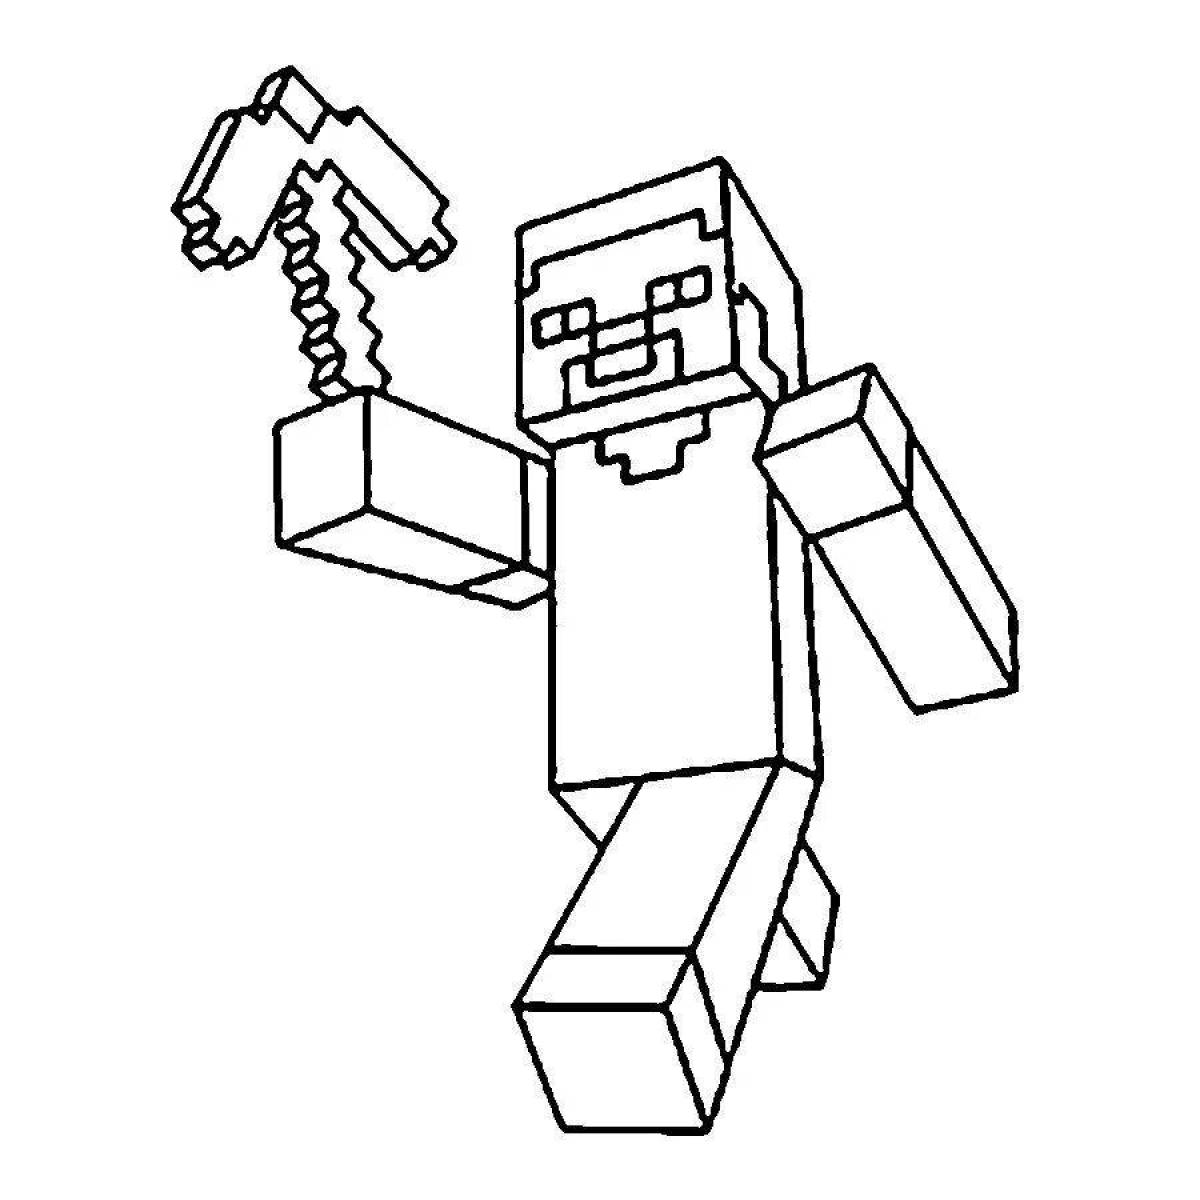 Amazing minecraft pixel coloring page